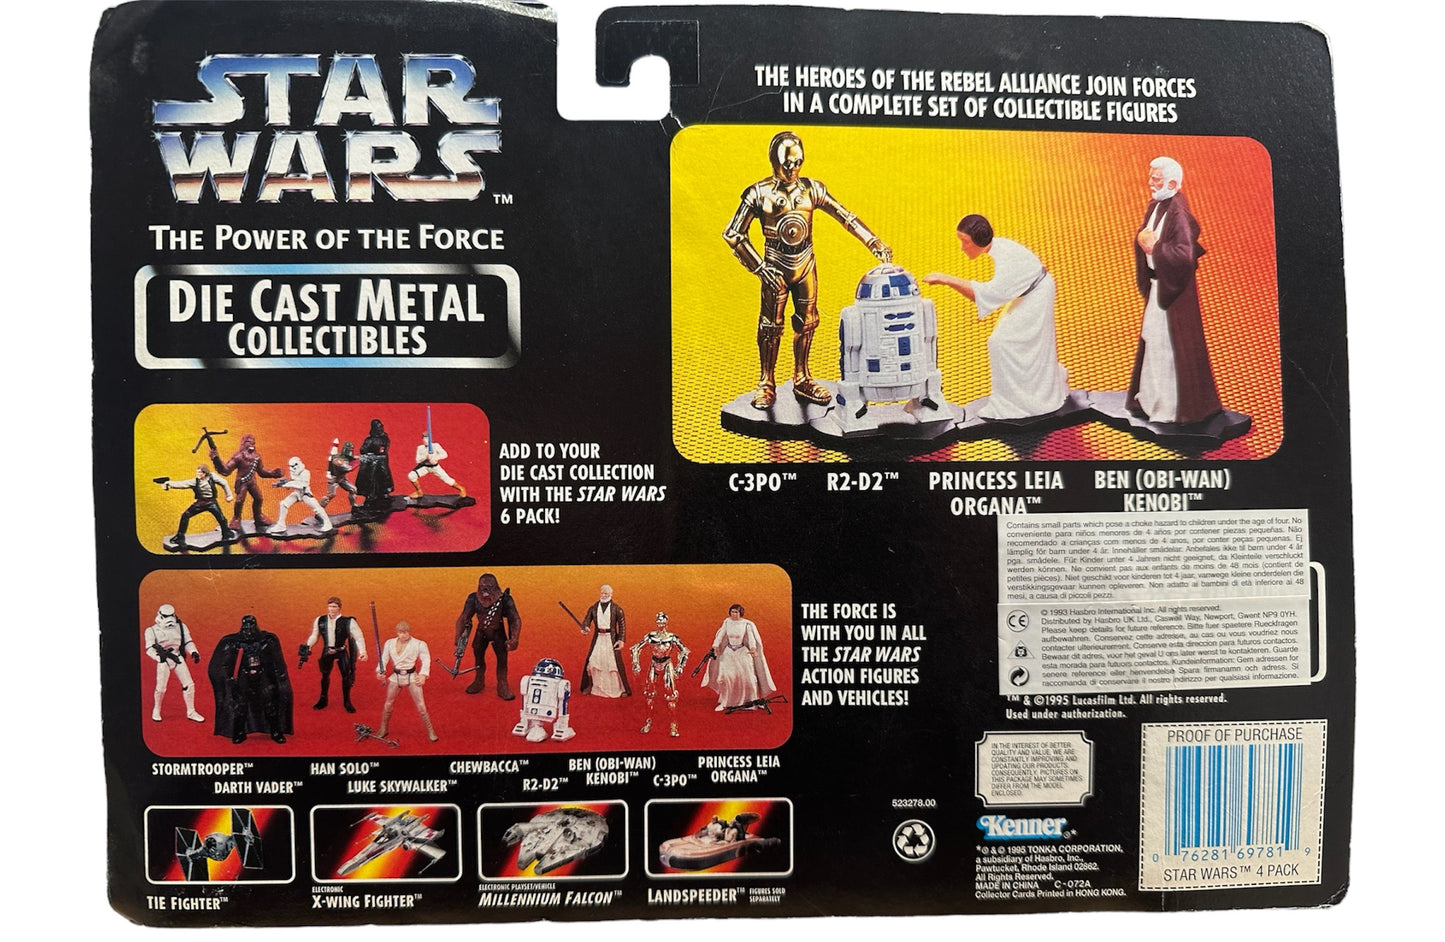 Vintage Kenner 1995 Star Wars The Power Of The Force Die Cast Metal Collectibles 4 Pack Action Figure Set - Factory Sealed Shop Stock Room Find